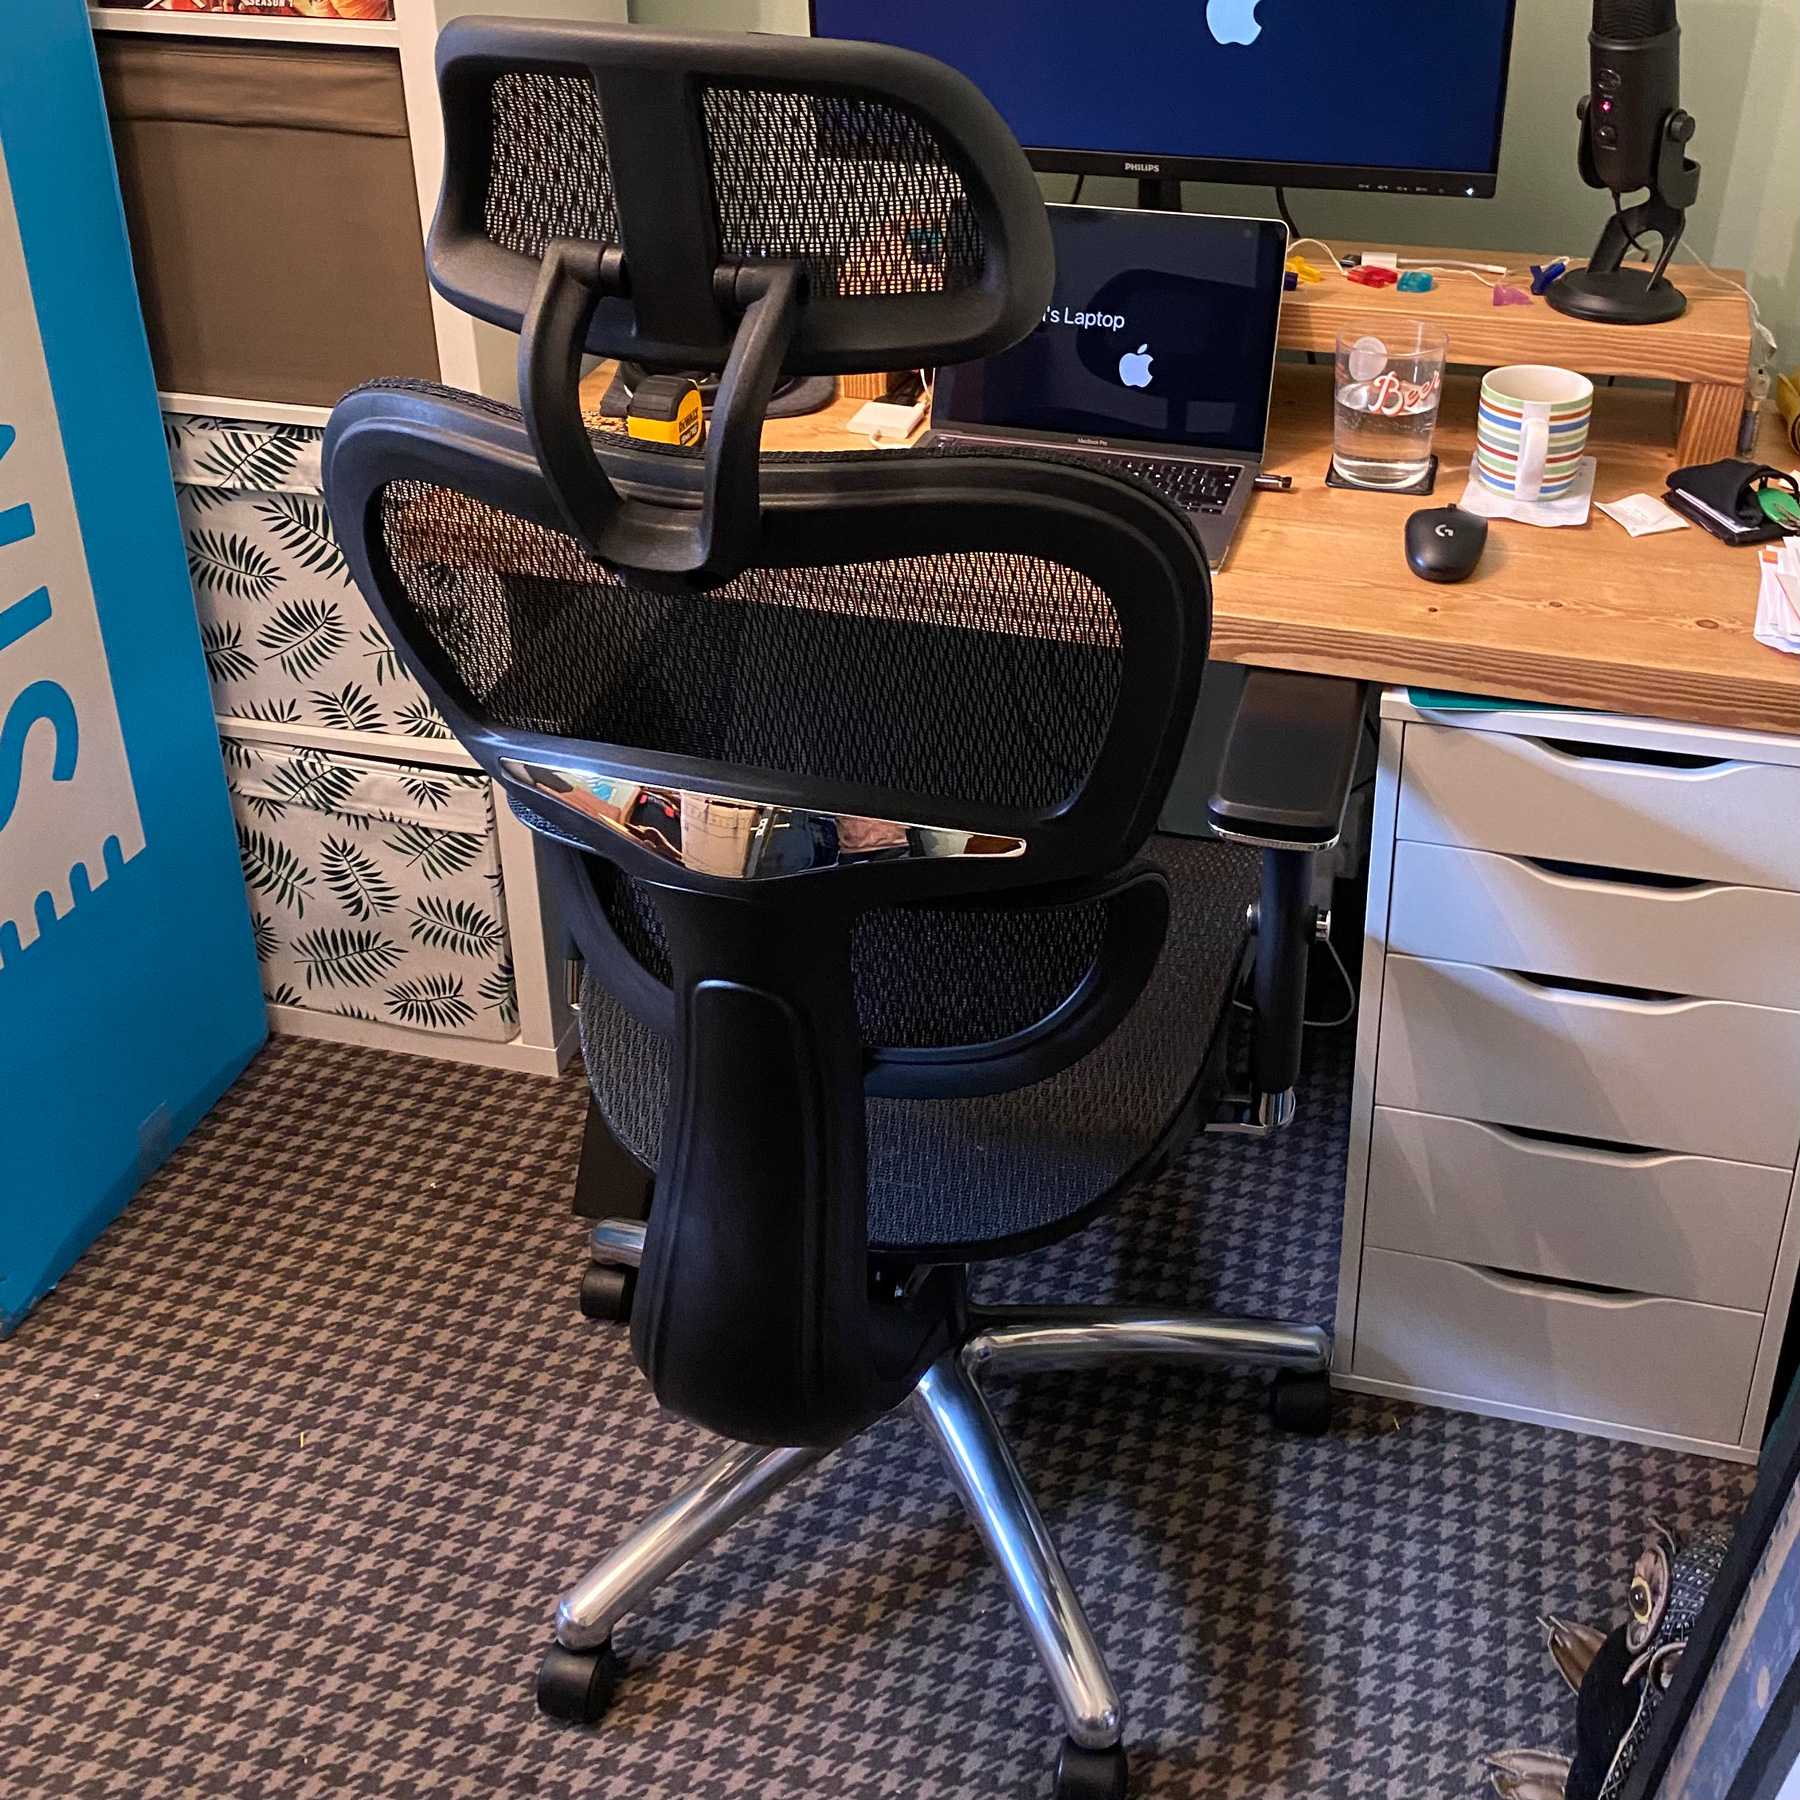 A new desk chair and a messy desk